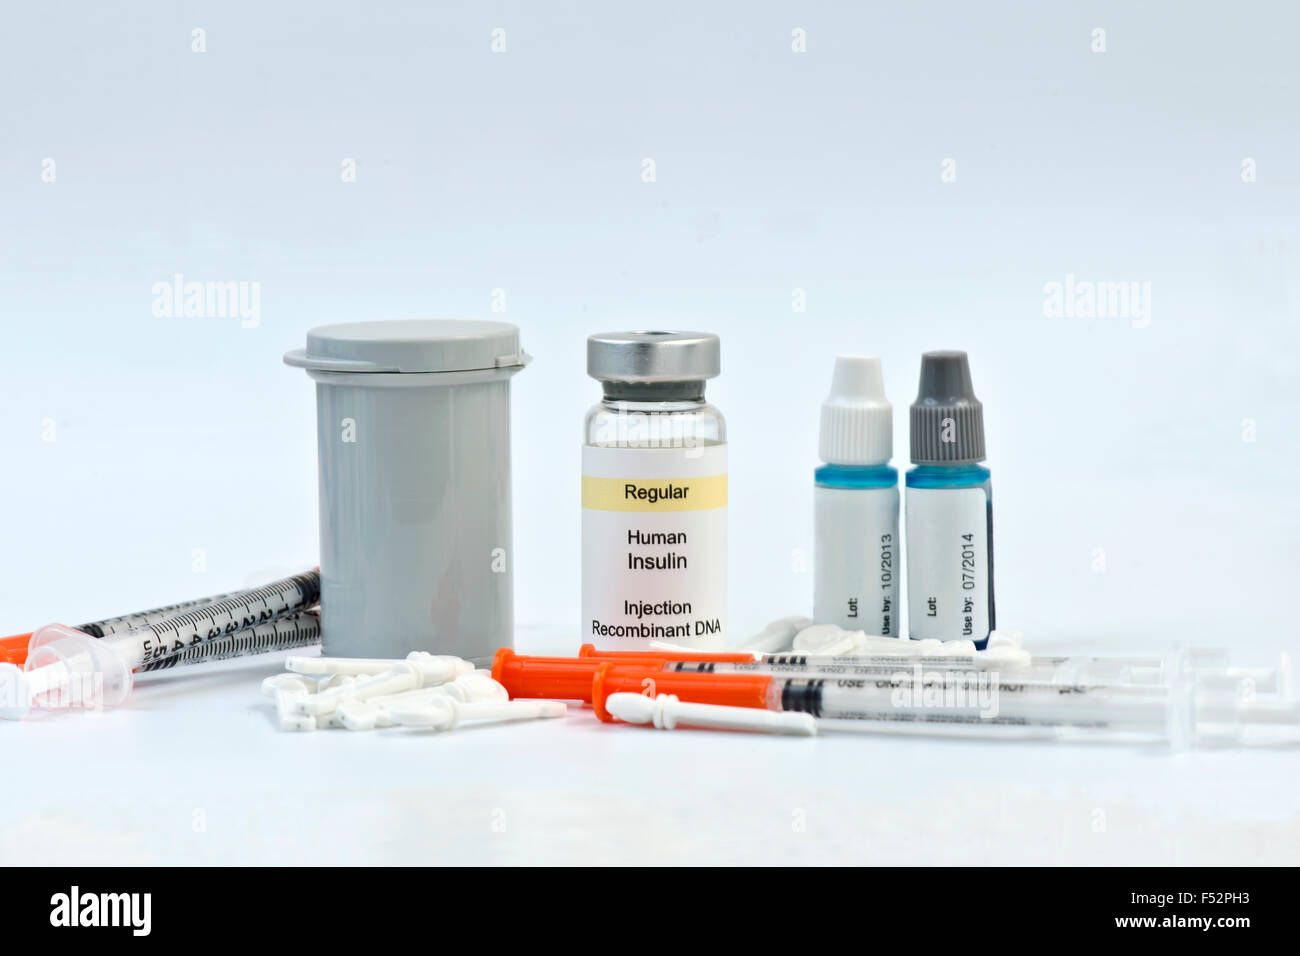 Diabetic testing strips, syringes, lancets, insulin and calibration solutions. Stock Photo